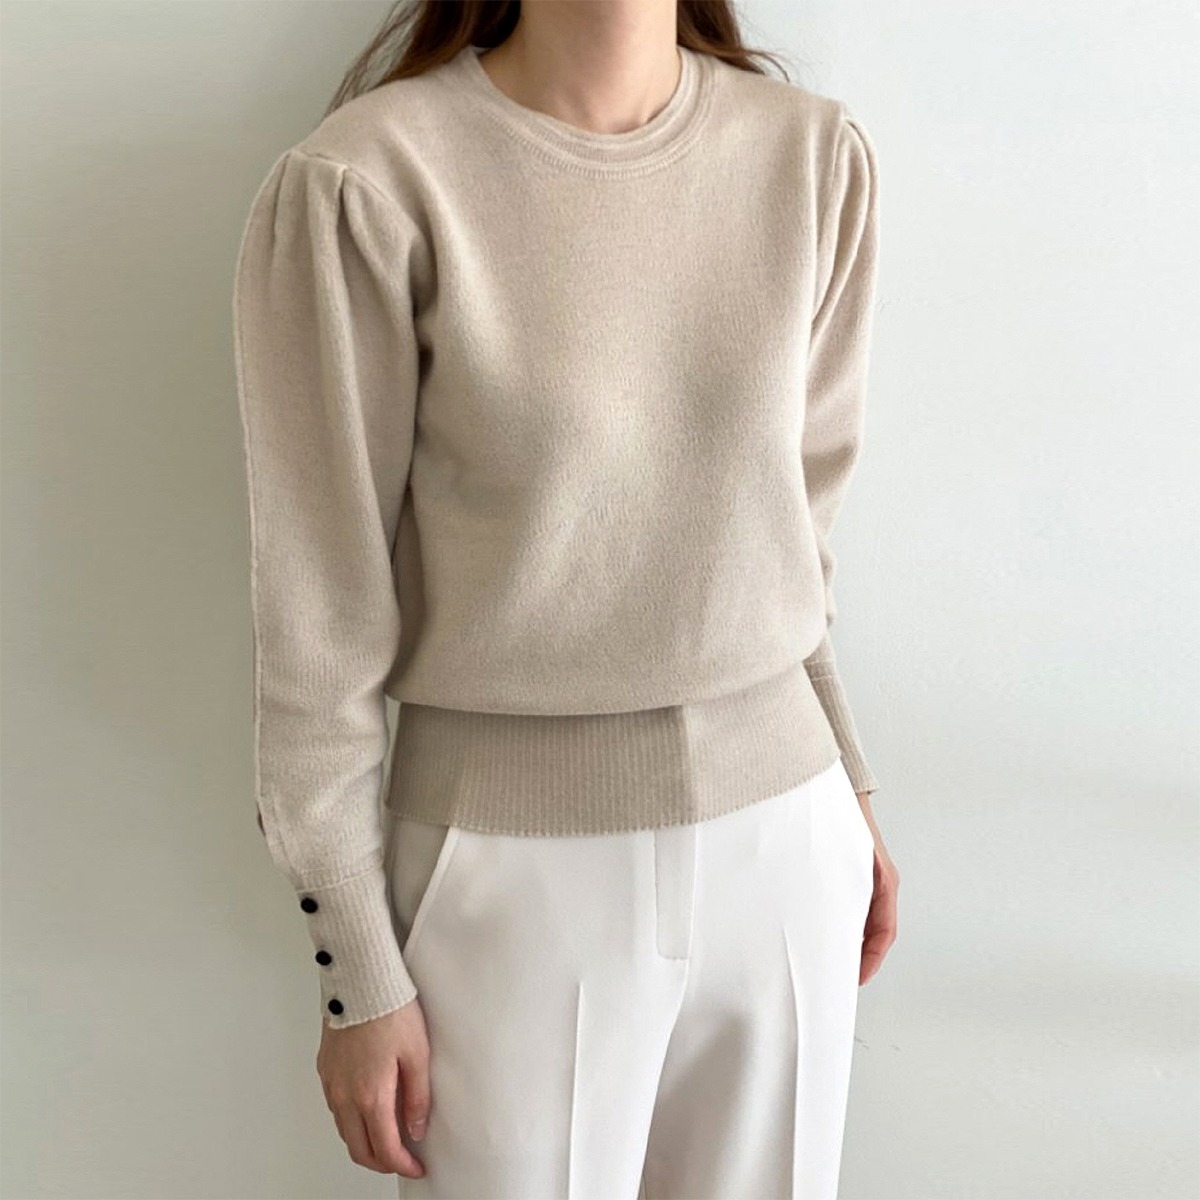 High-quality Whole garment Shirring Puff Round Neck Knitwear (Super Fine Mary Knowl 100%)